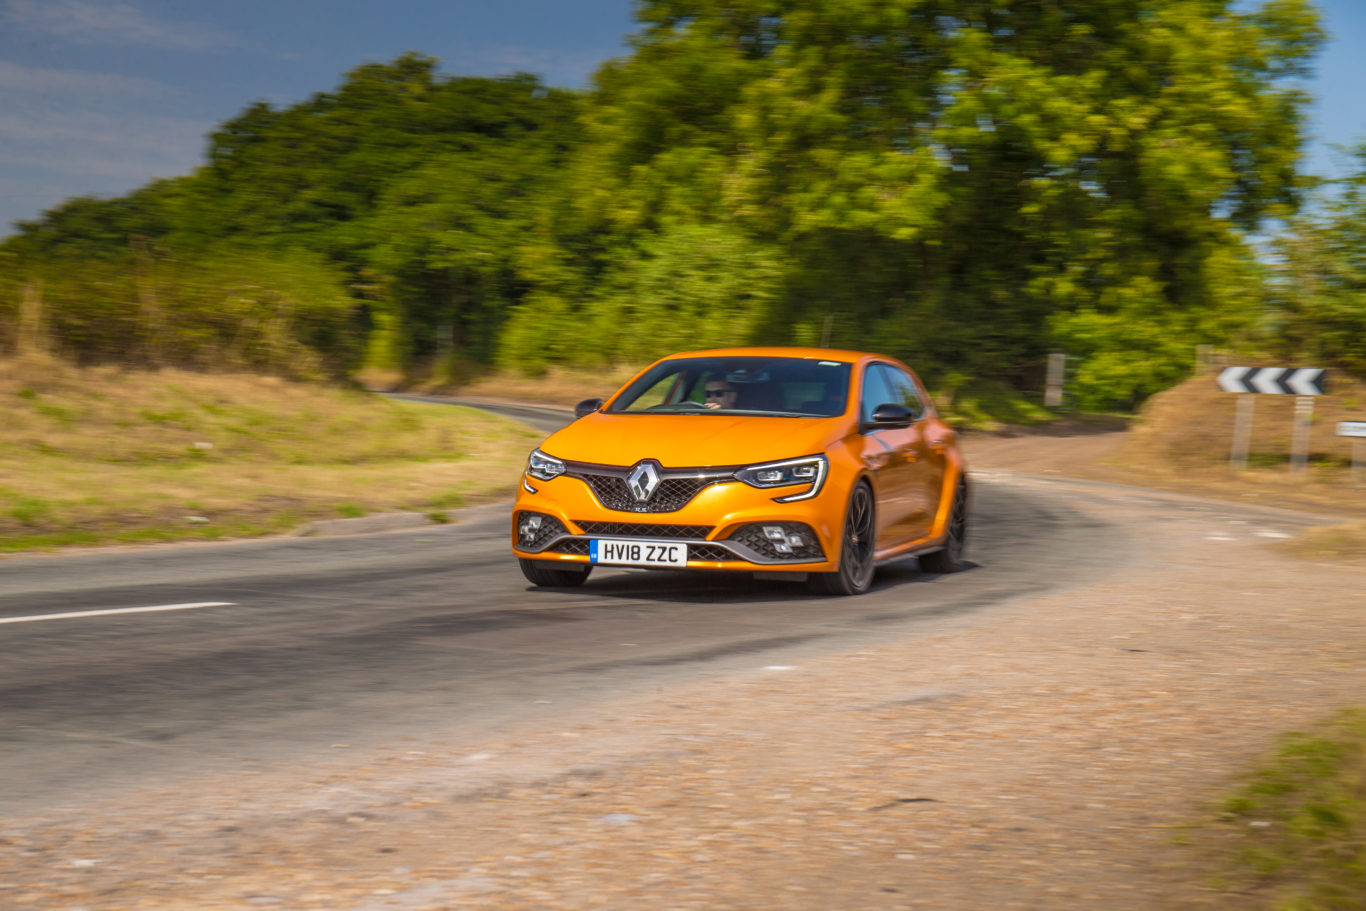 The Megane's all-wheel-steer system aids cornering